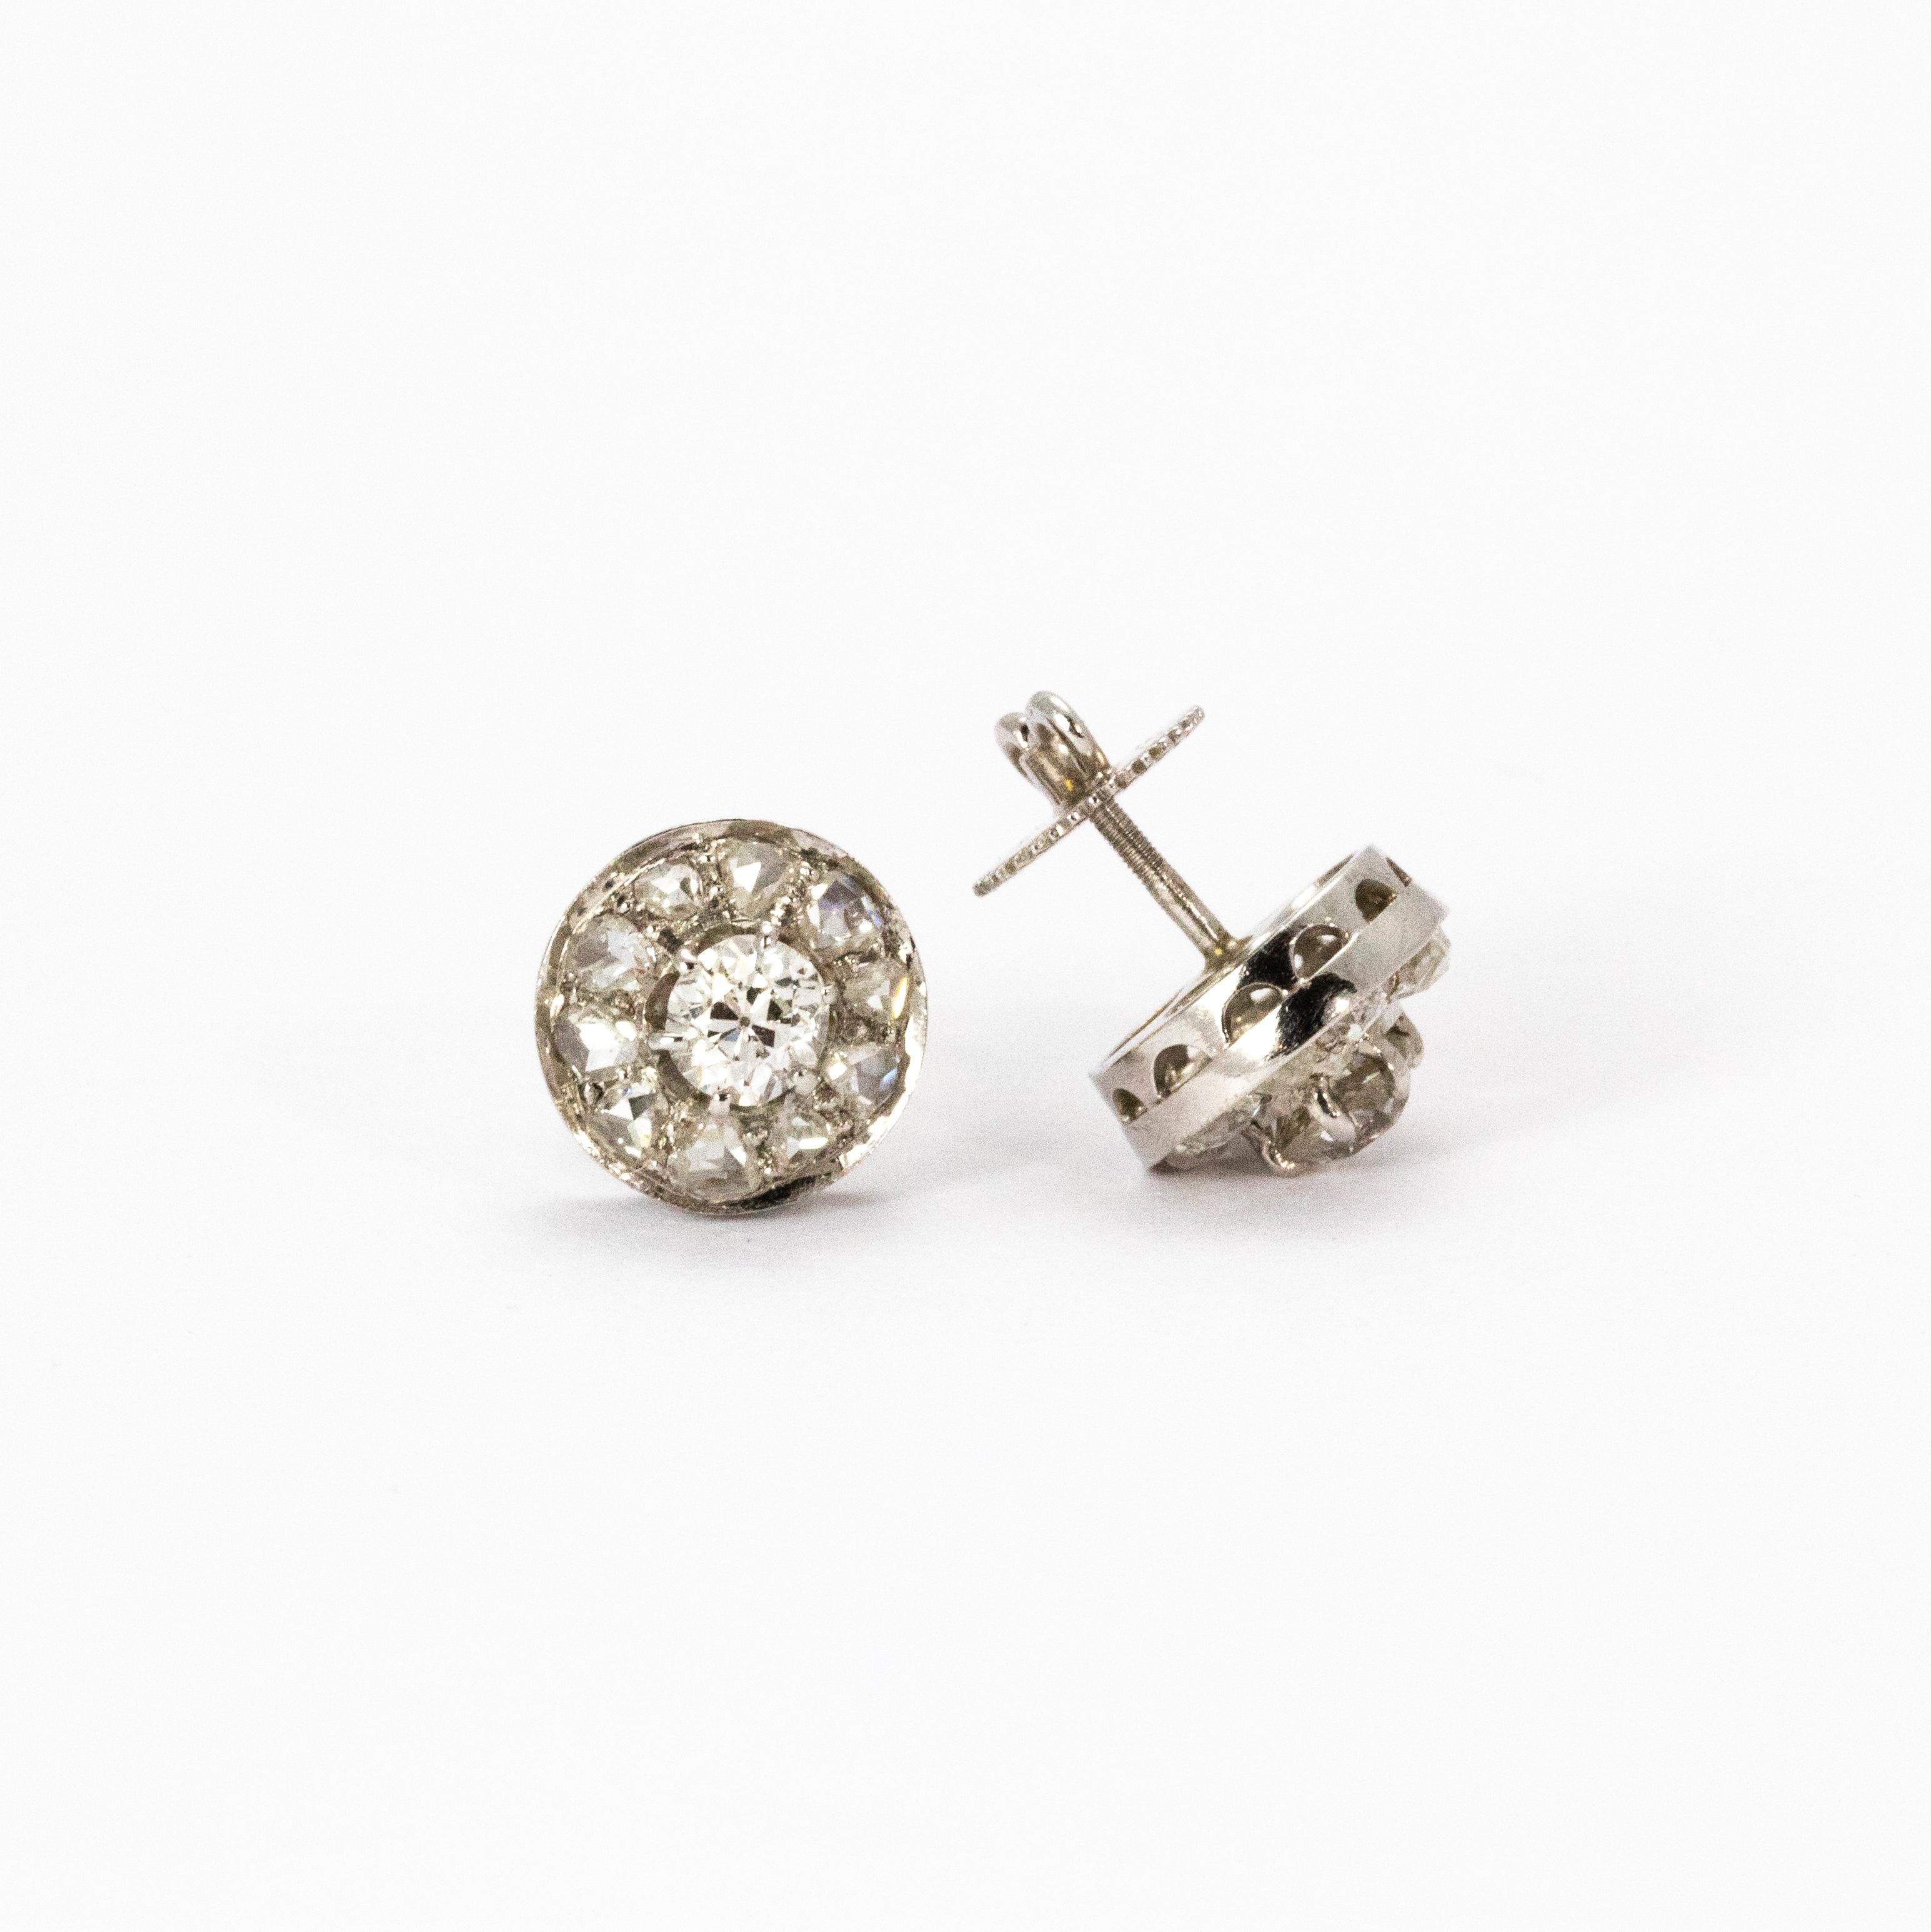 A pair of breathtaking vintage diamond earrings modelled in platinum with screw back fittings. Each earring hosts a central old European cut diamond measuring 30 points, surrounded by a halo of eight more brilliant white cut diamonds. 

Total